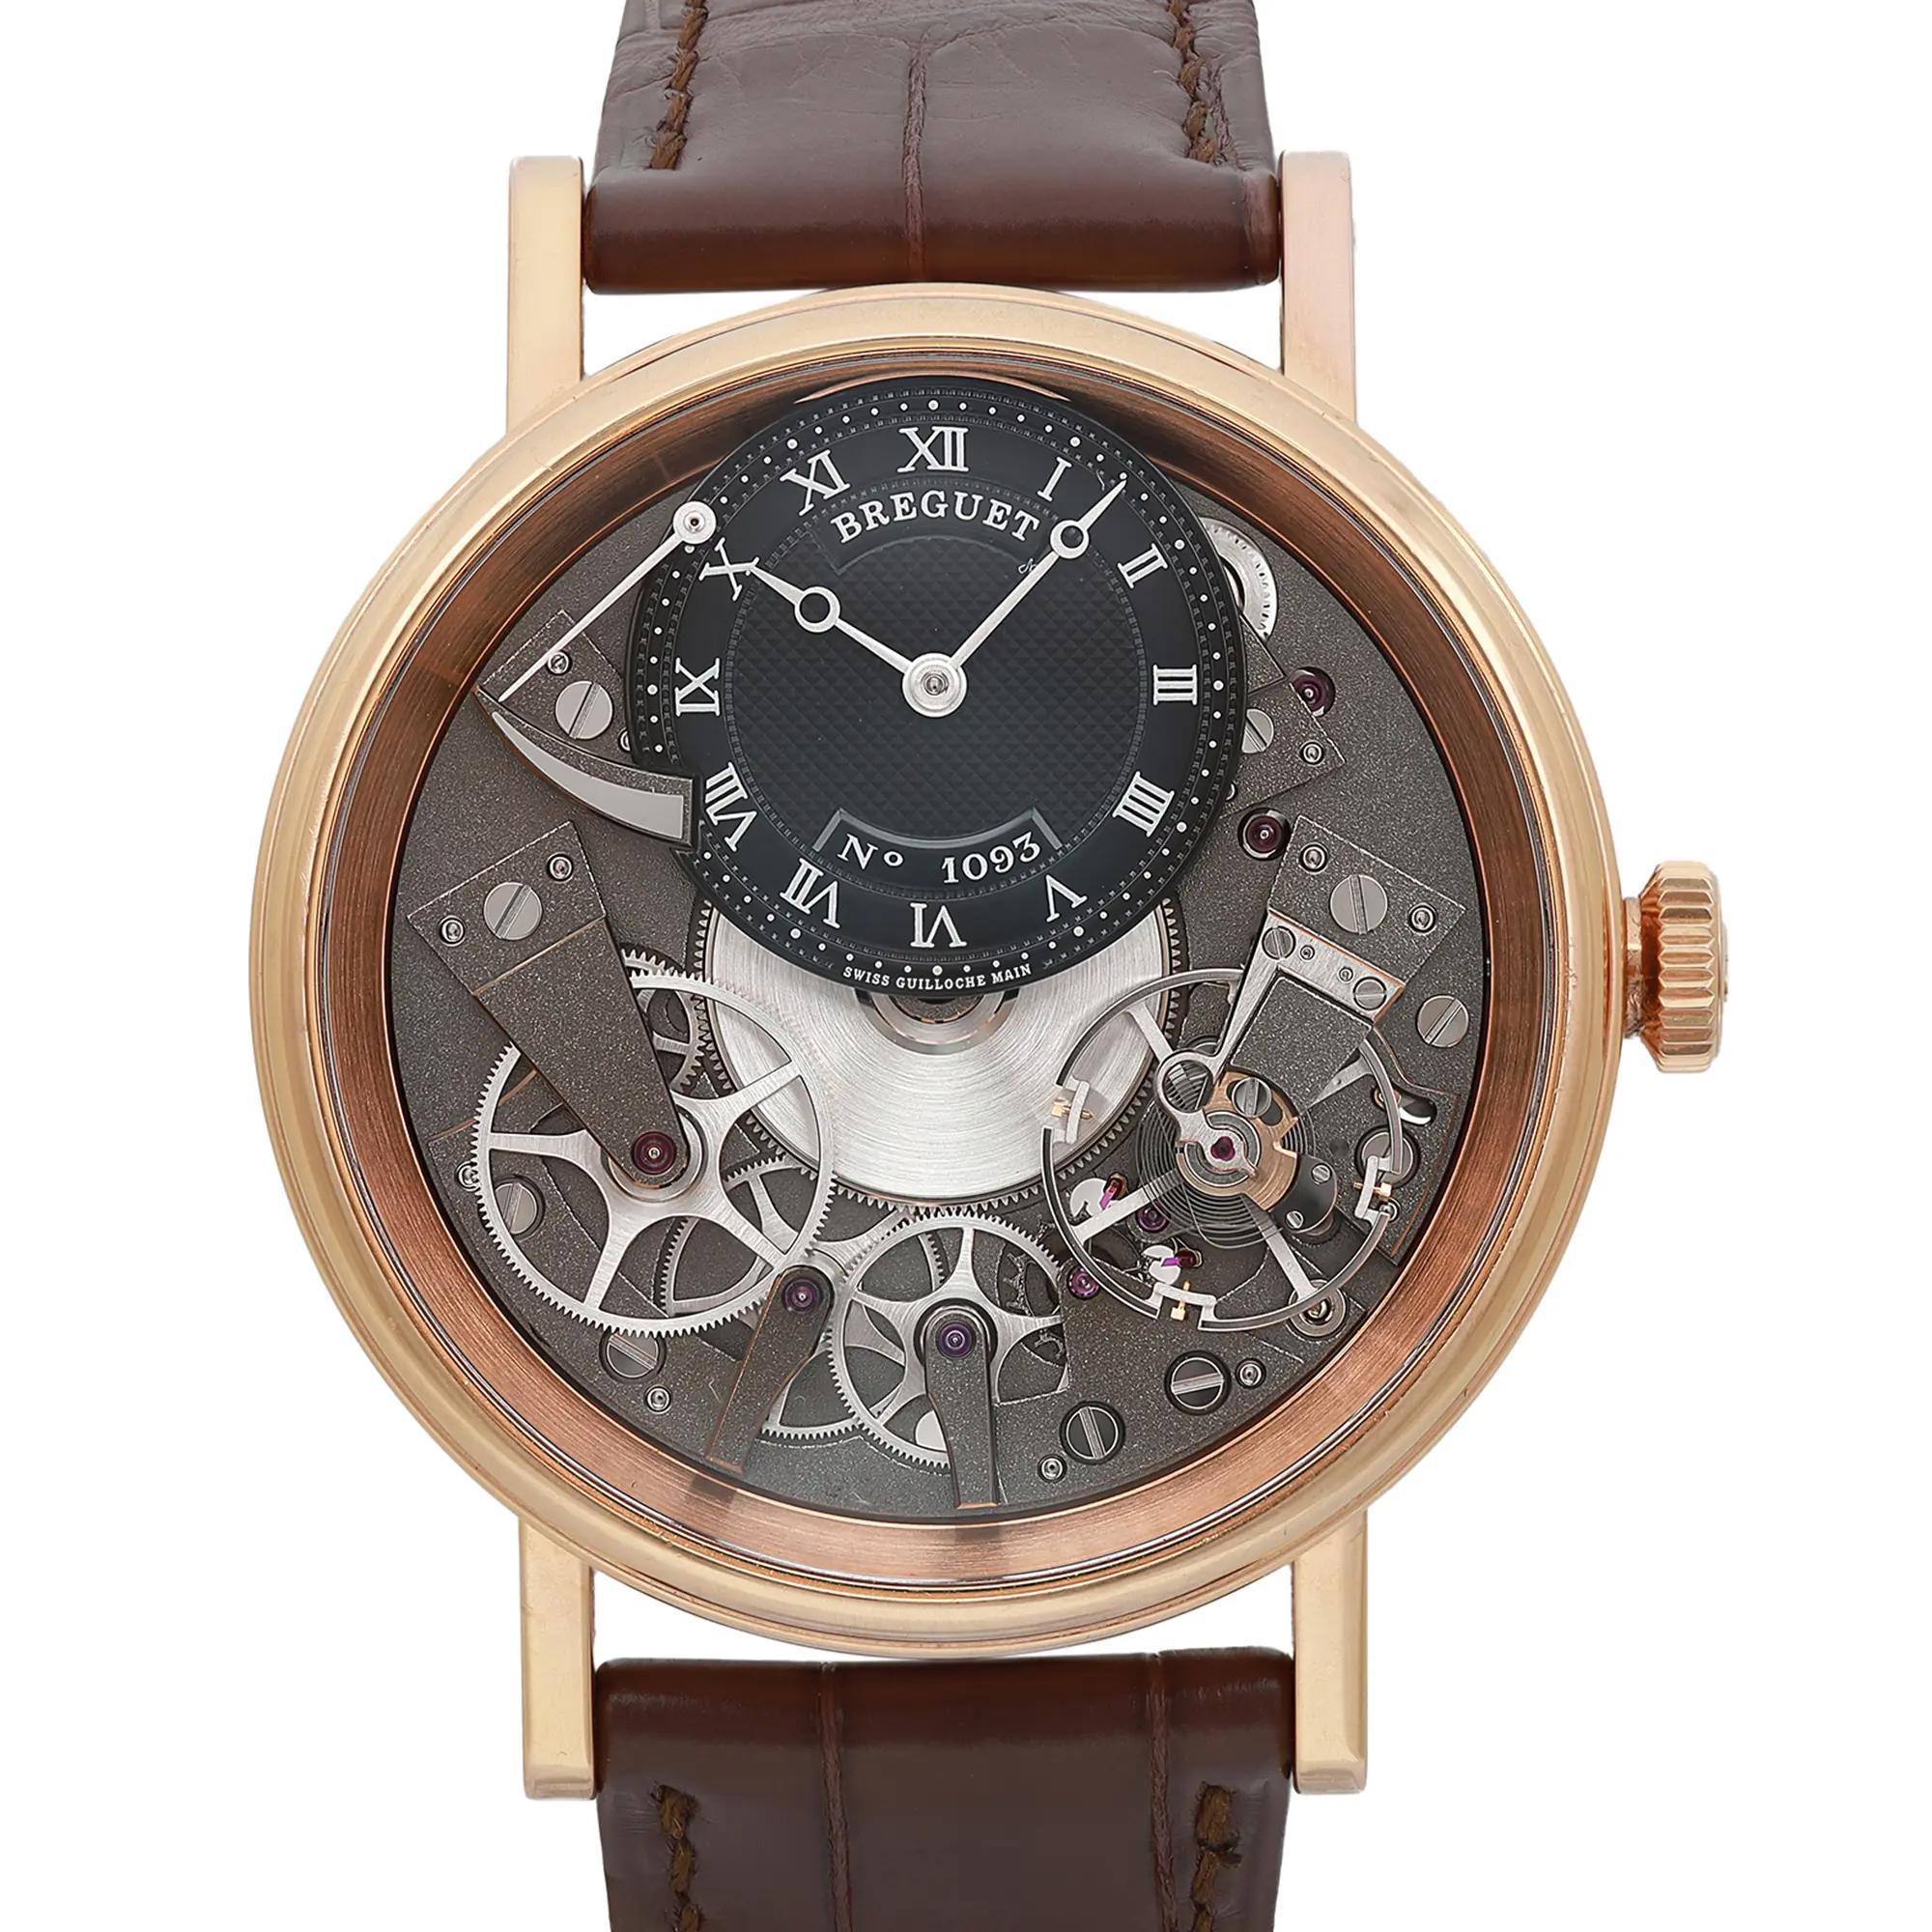 Pre-owned in mint condition. Unworn band. The original box and papers are not included. 

Brand and Model Information:
Brand: Breguet
Model: Breguet Tradition
Model Number: 7057BR/G9/9W6
Type and Style:

Type: Wristwatch
Style: Luxury
Department: